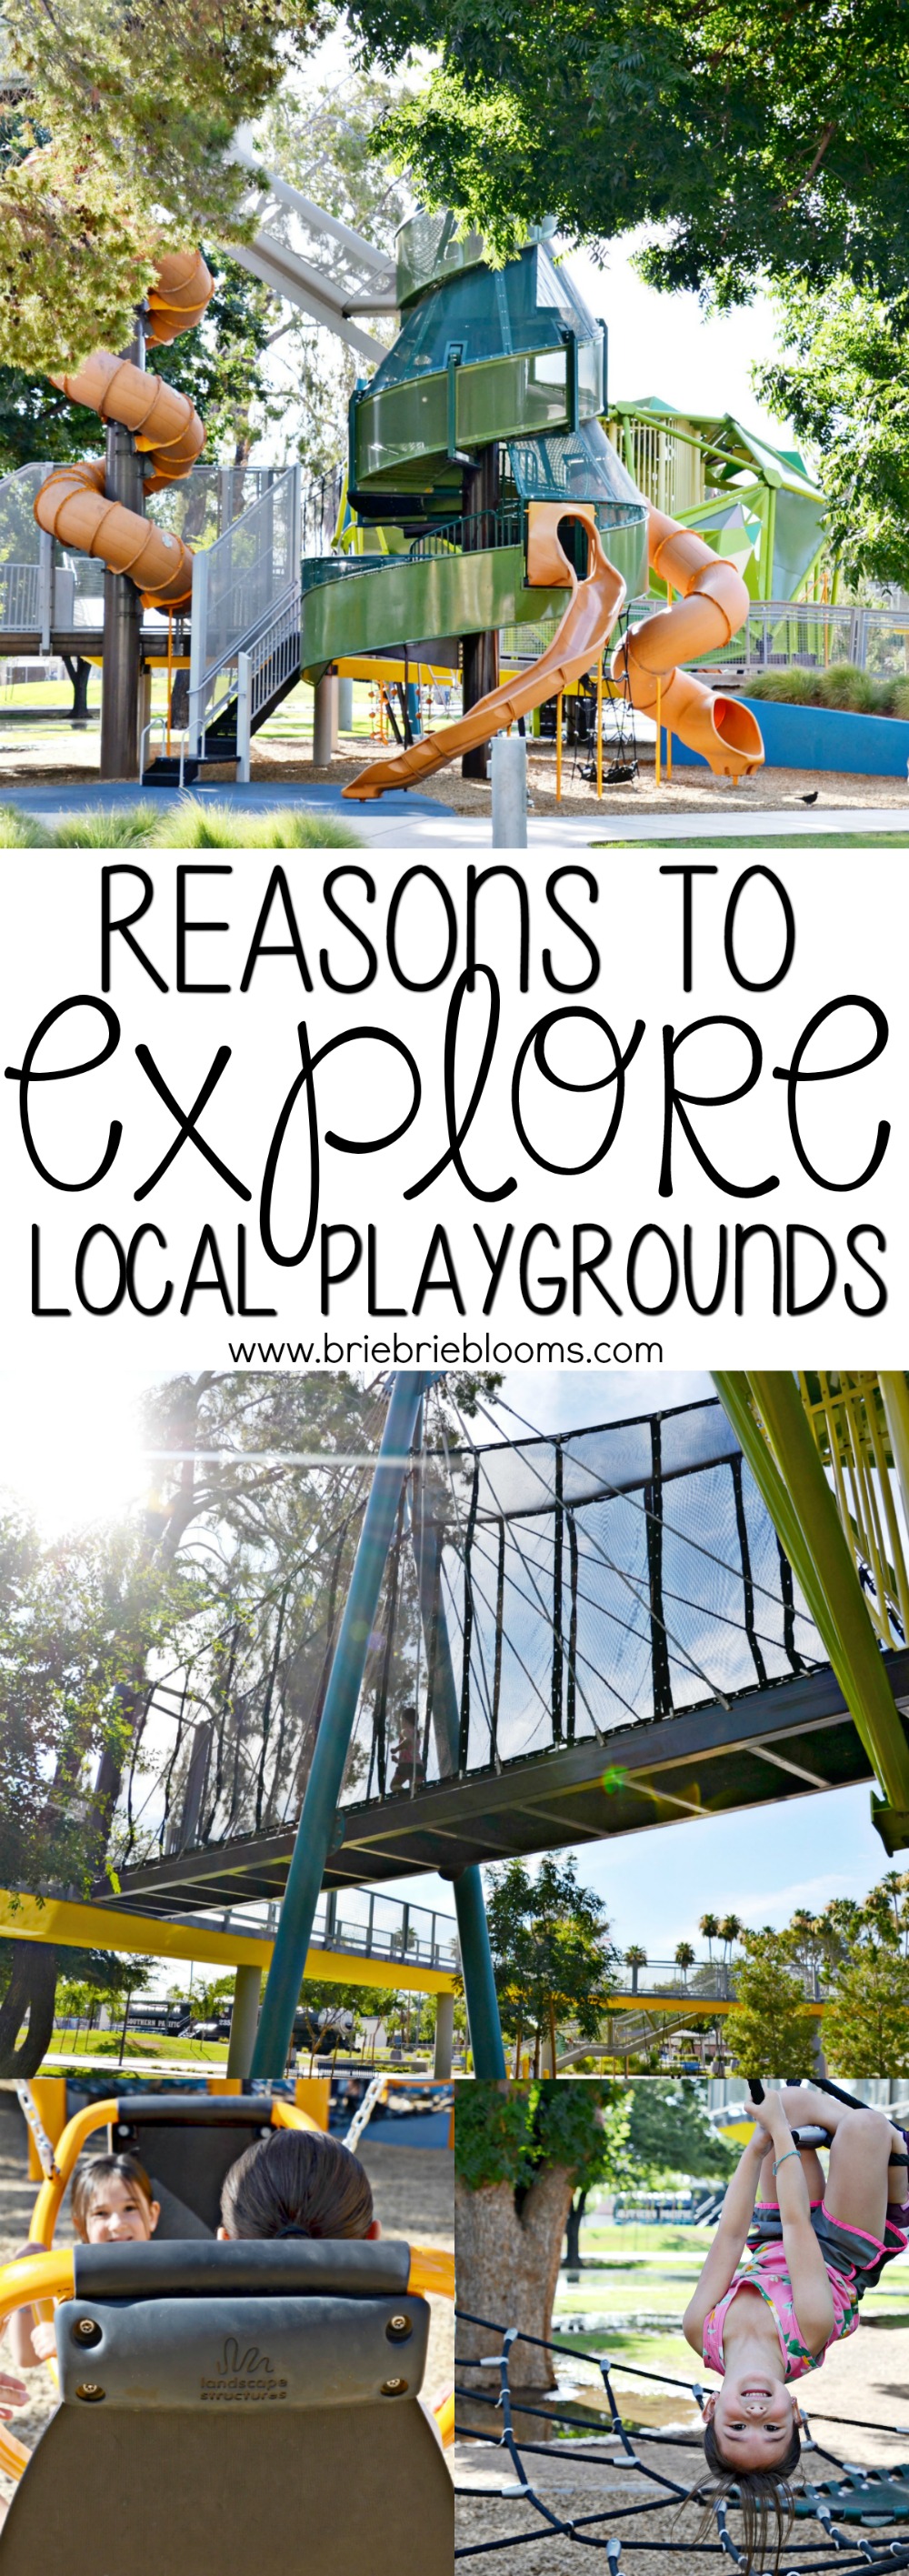 Play time is so important for children and these reasons to explore local playgrounds are fantastic!